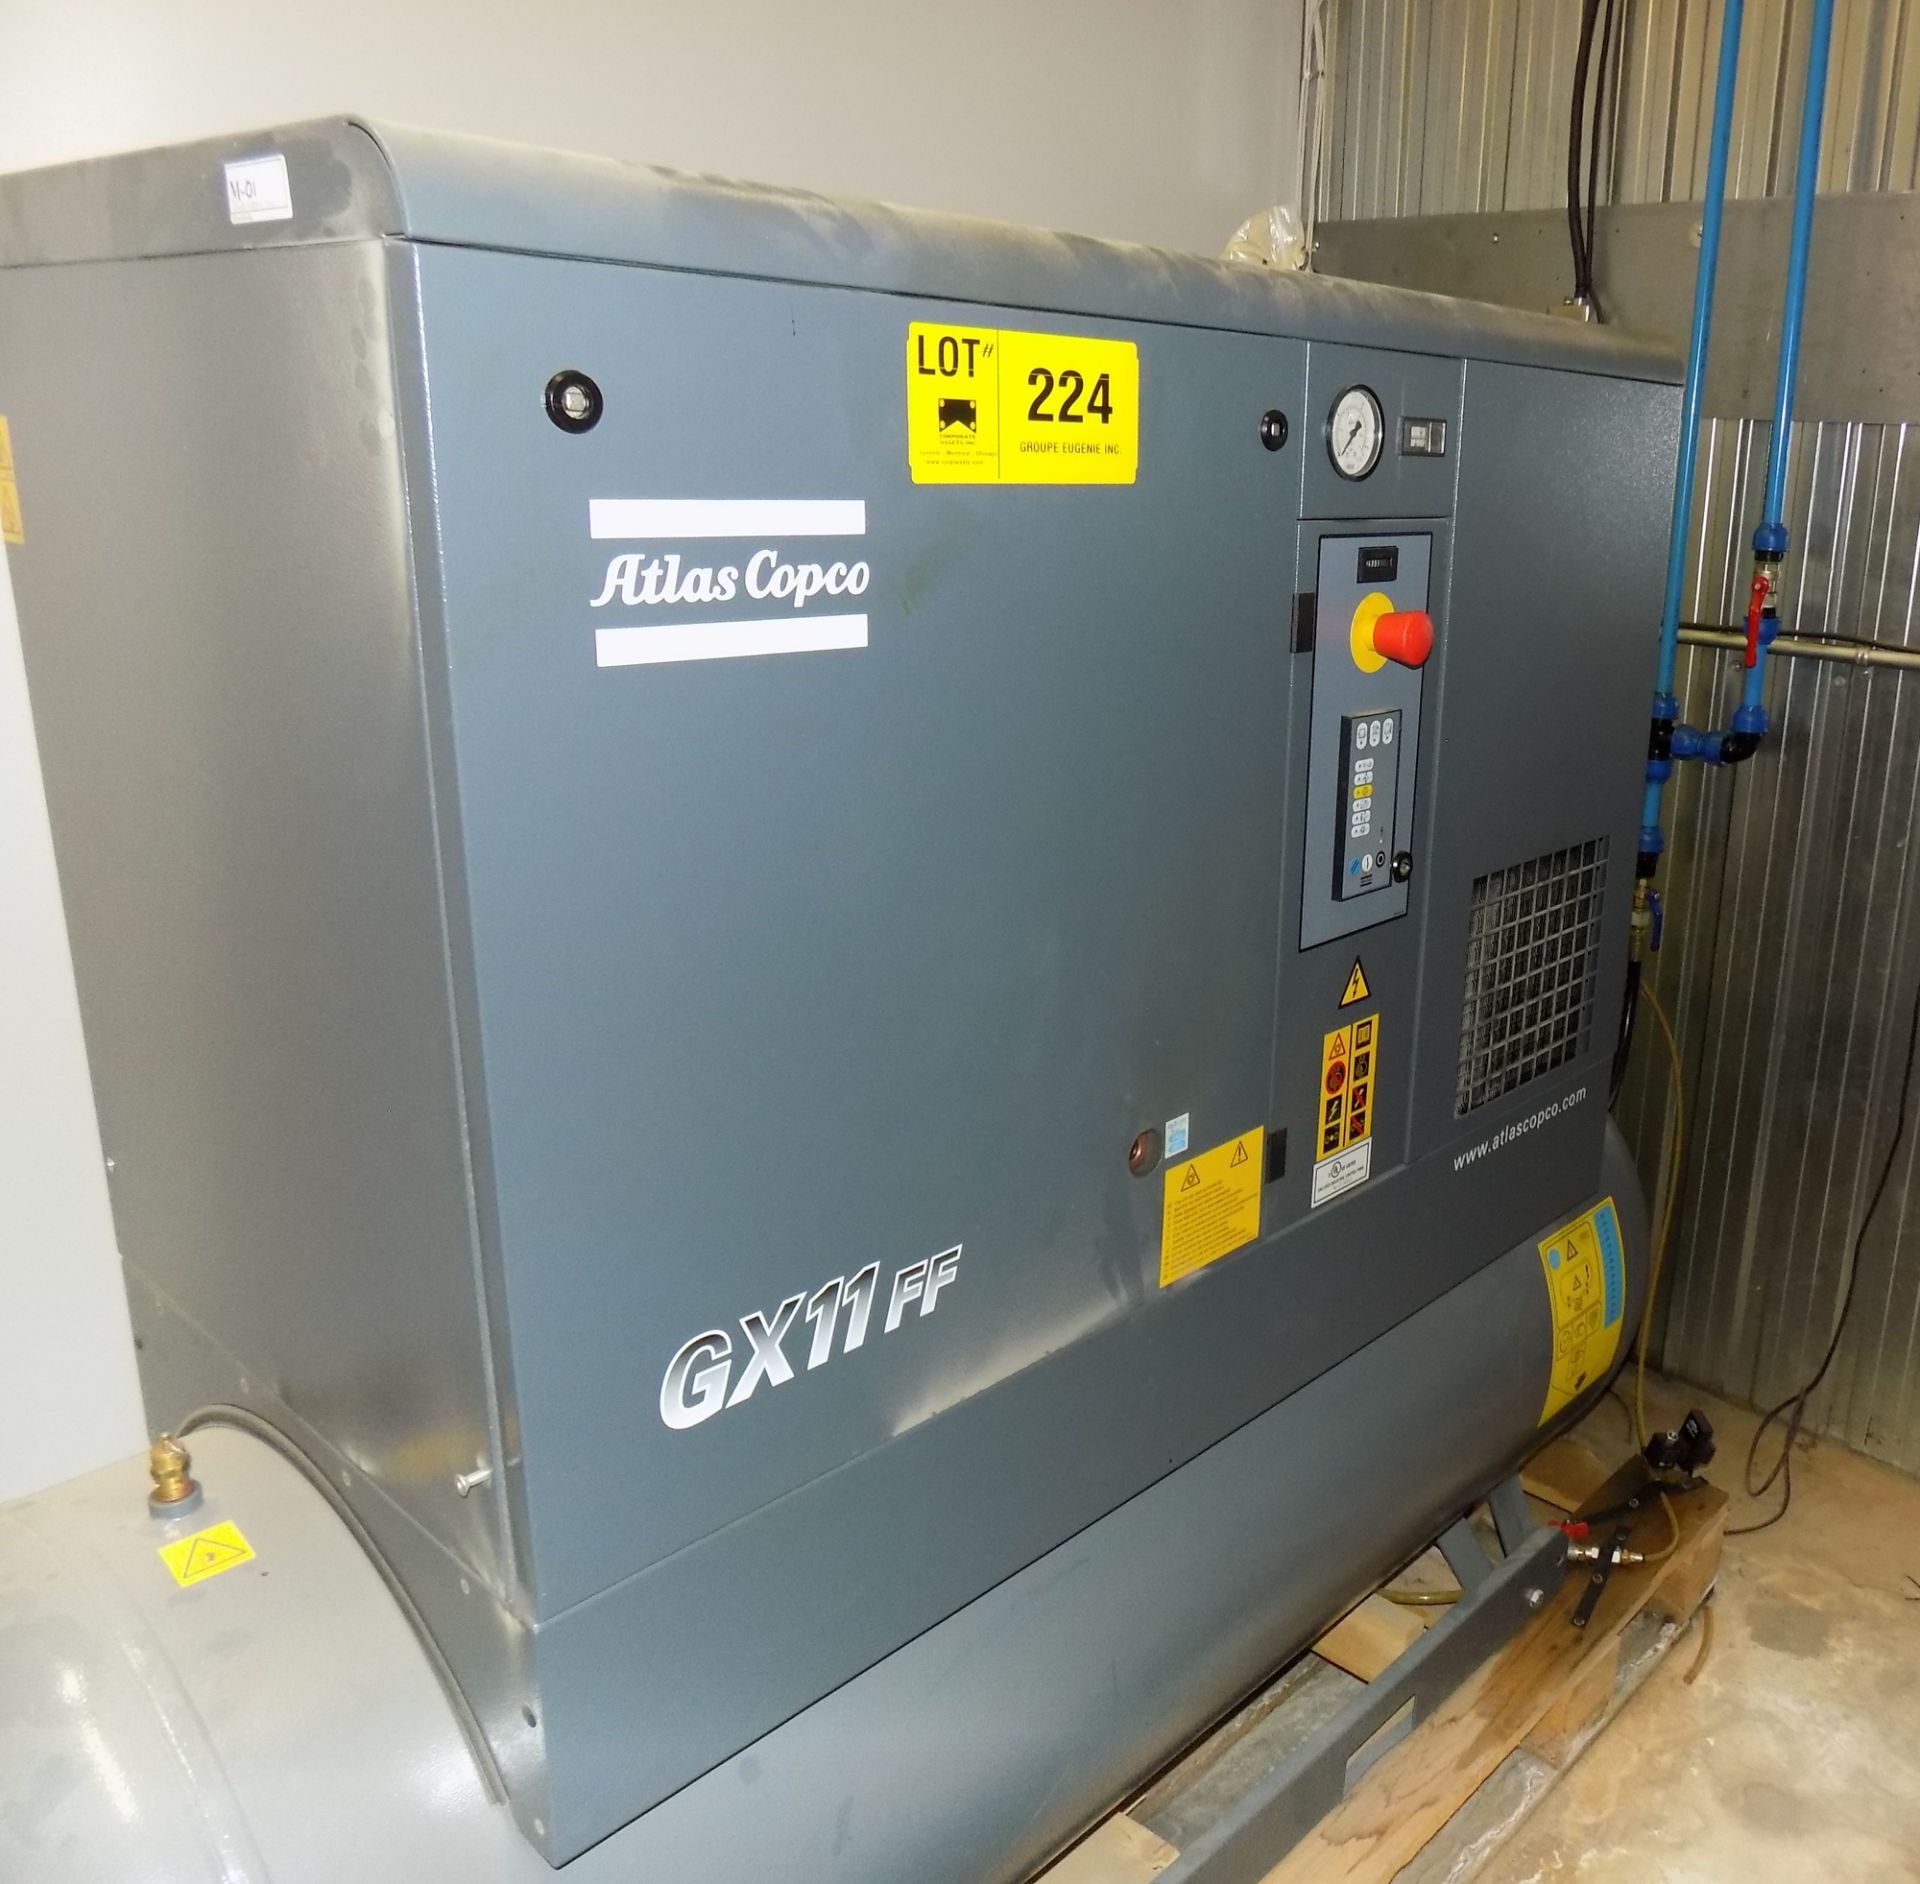 ATLAS COPCO (2015) GX11 FF 15 HP TANK MOUNTED SCREW TYPE AIR COMPRESSOR WITH 47.7 CFM @ 150 PSI